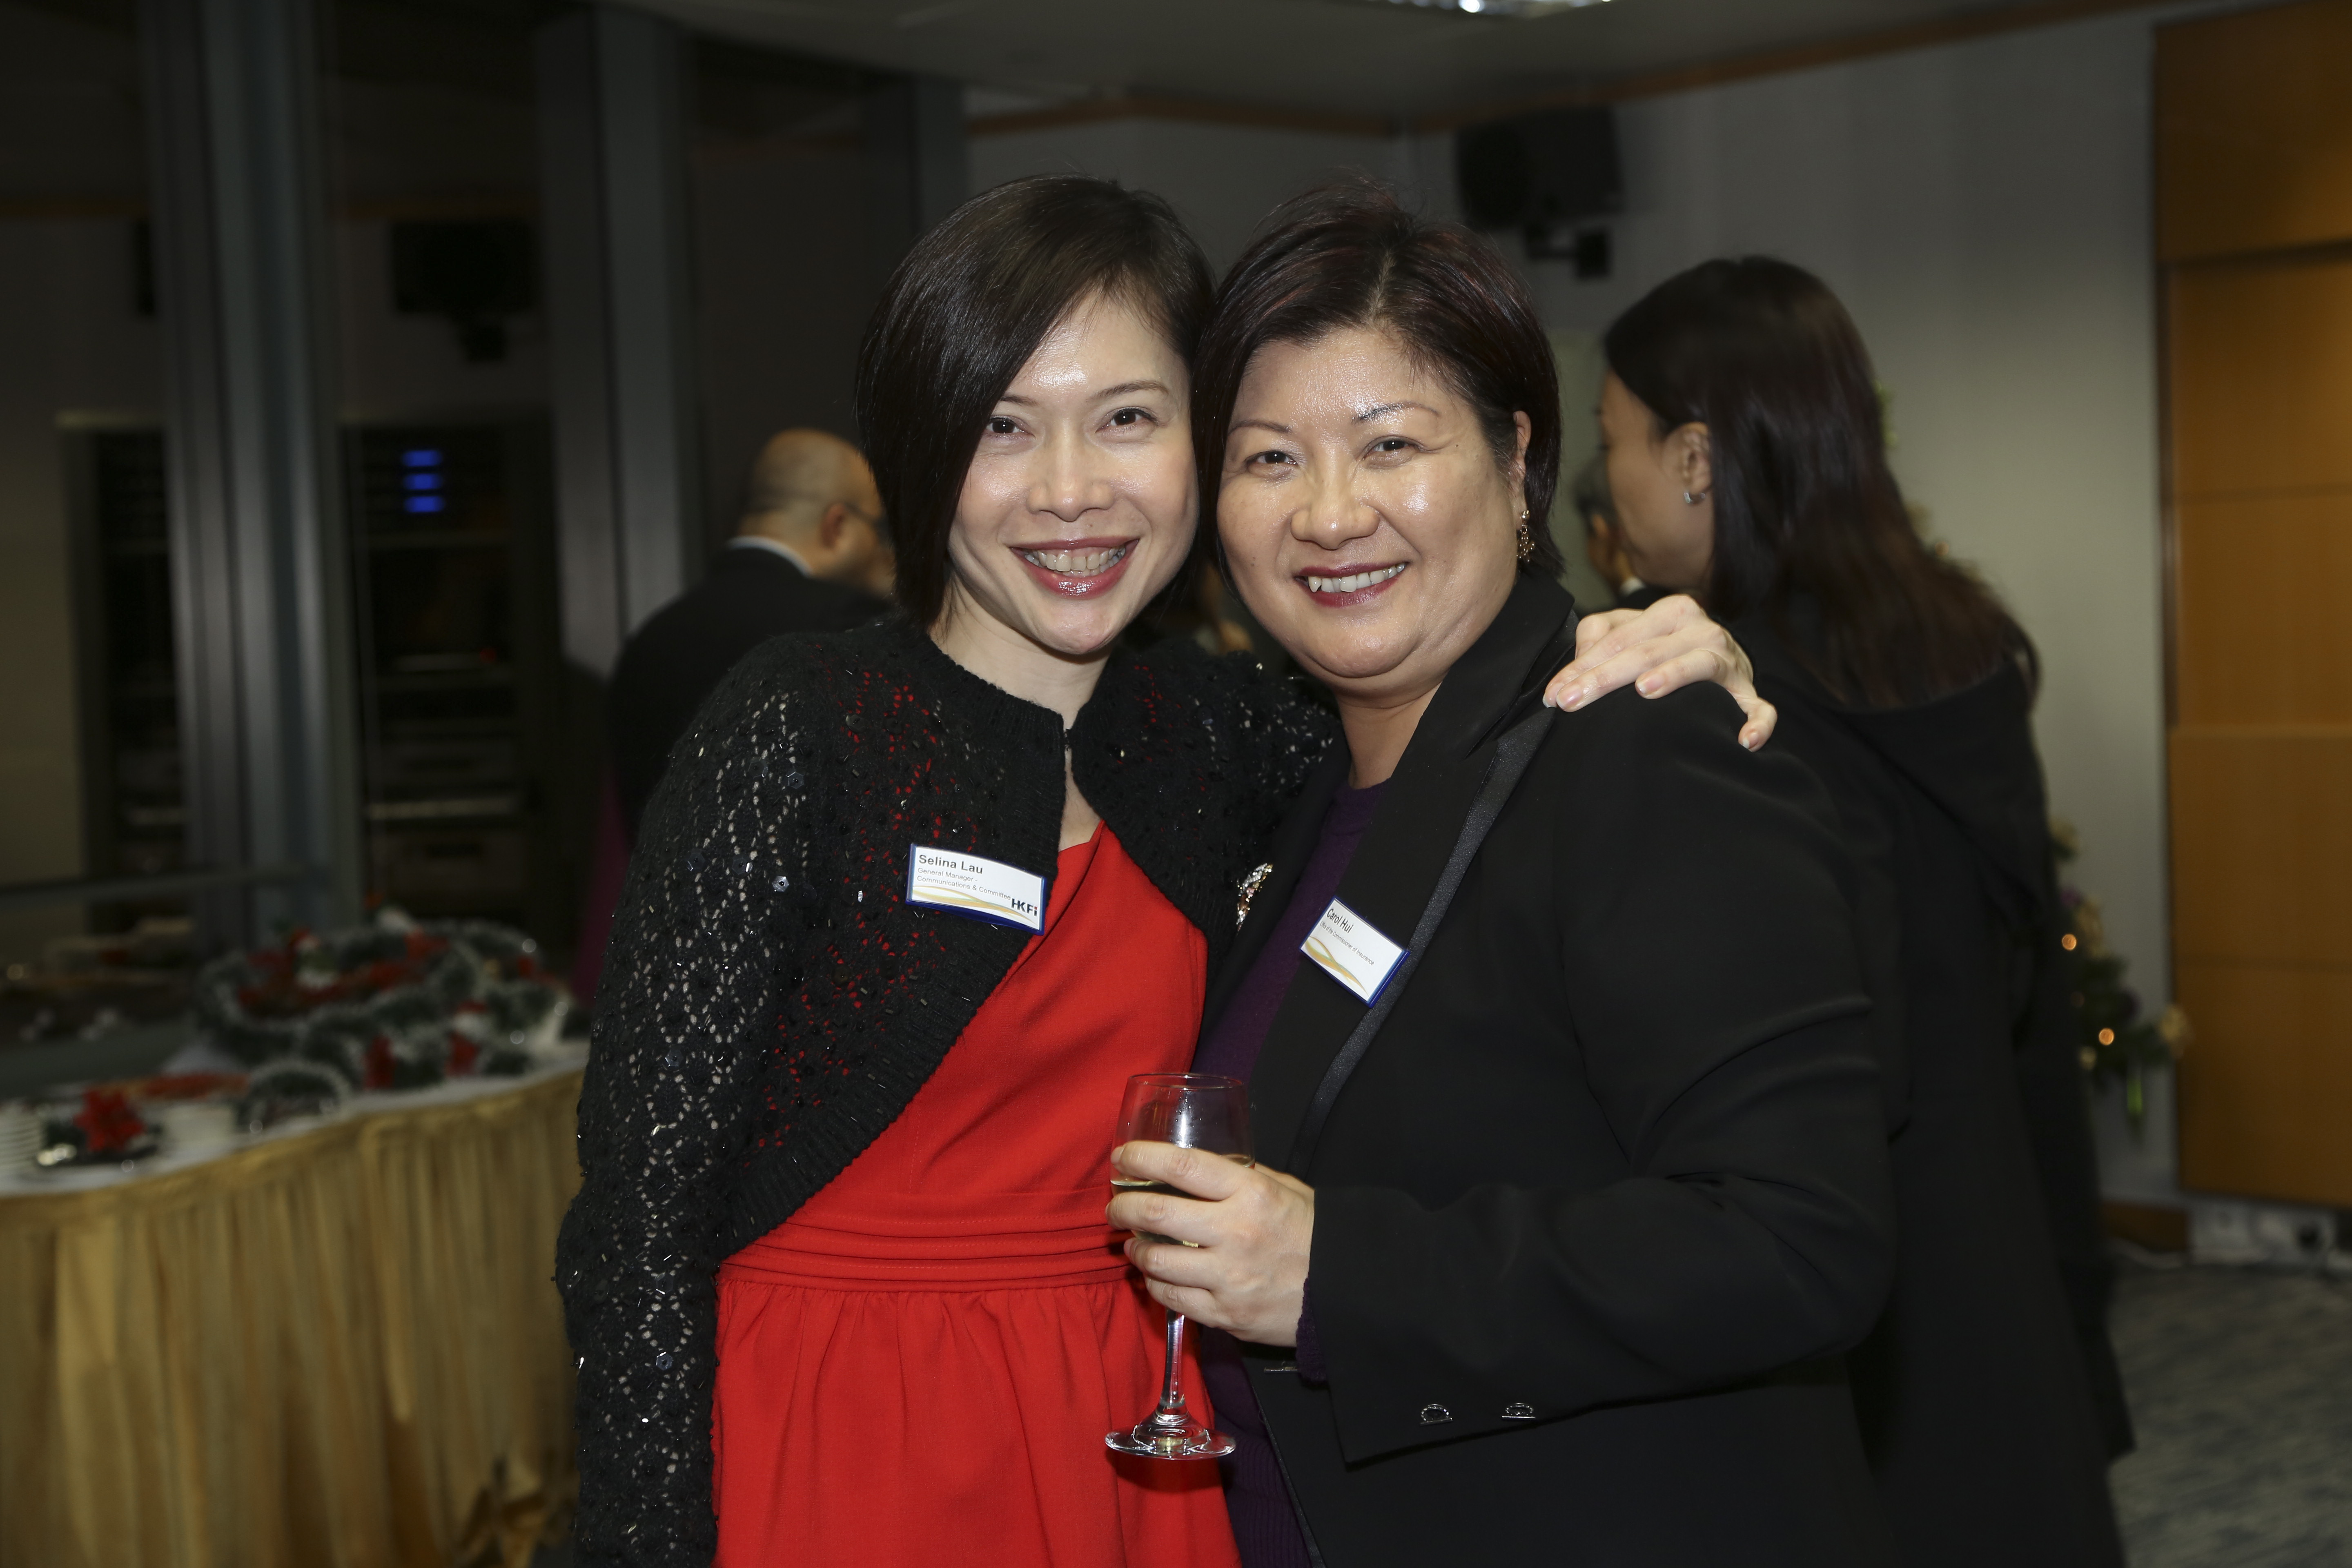 2013 Extraordinary General Meeting & Christmas Cocktail Party